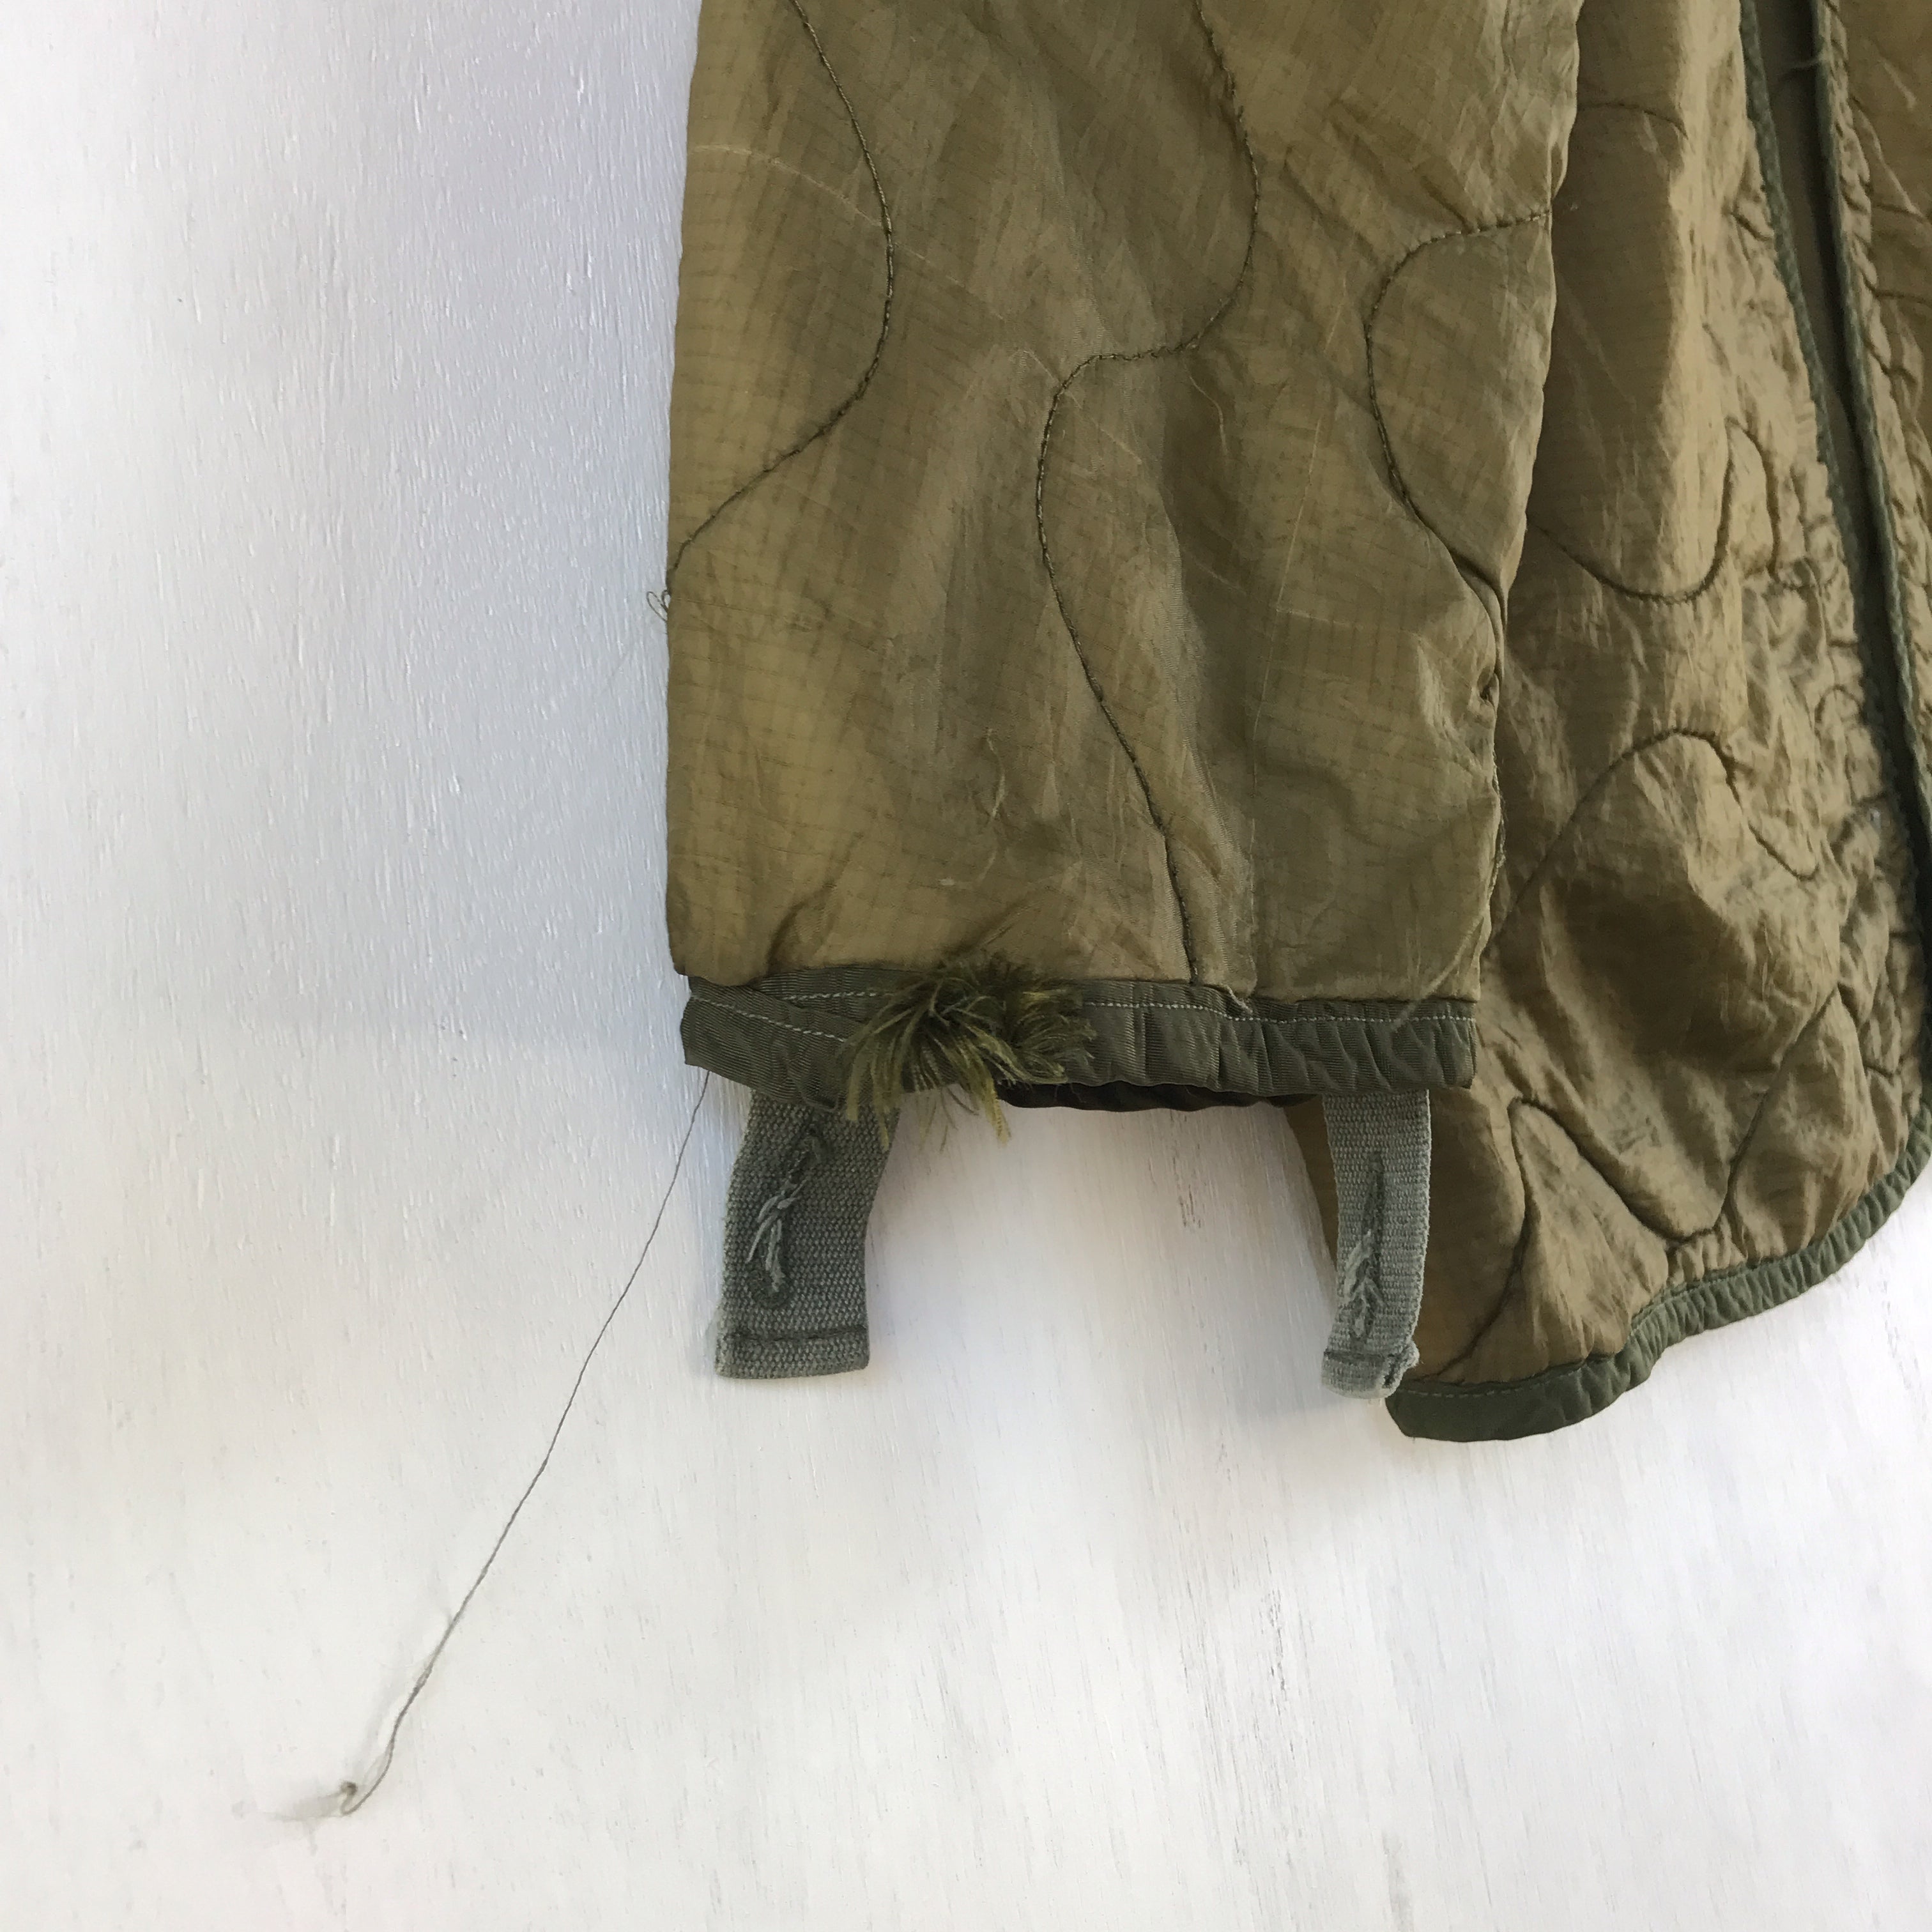 [ ONLY ONE ! ] LINER, COLD WEATHER COAT, MAN'S /U.S.MILITARY